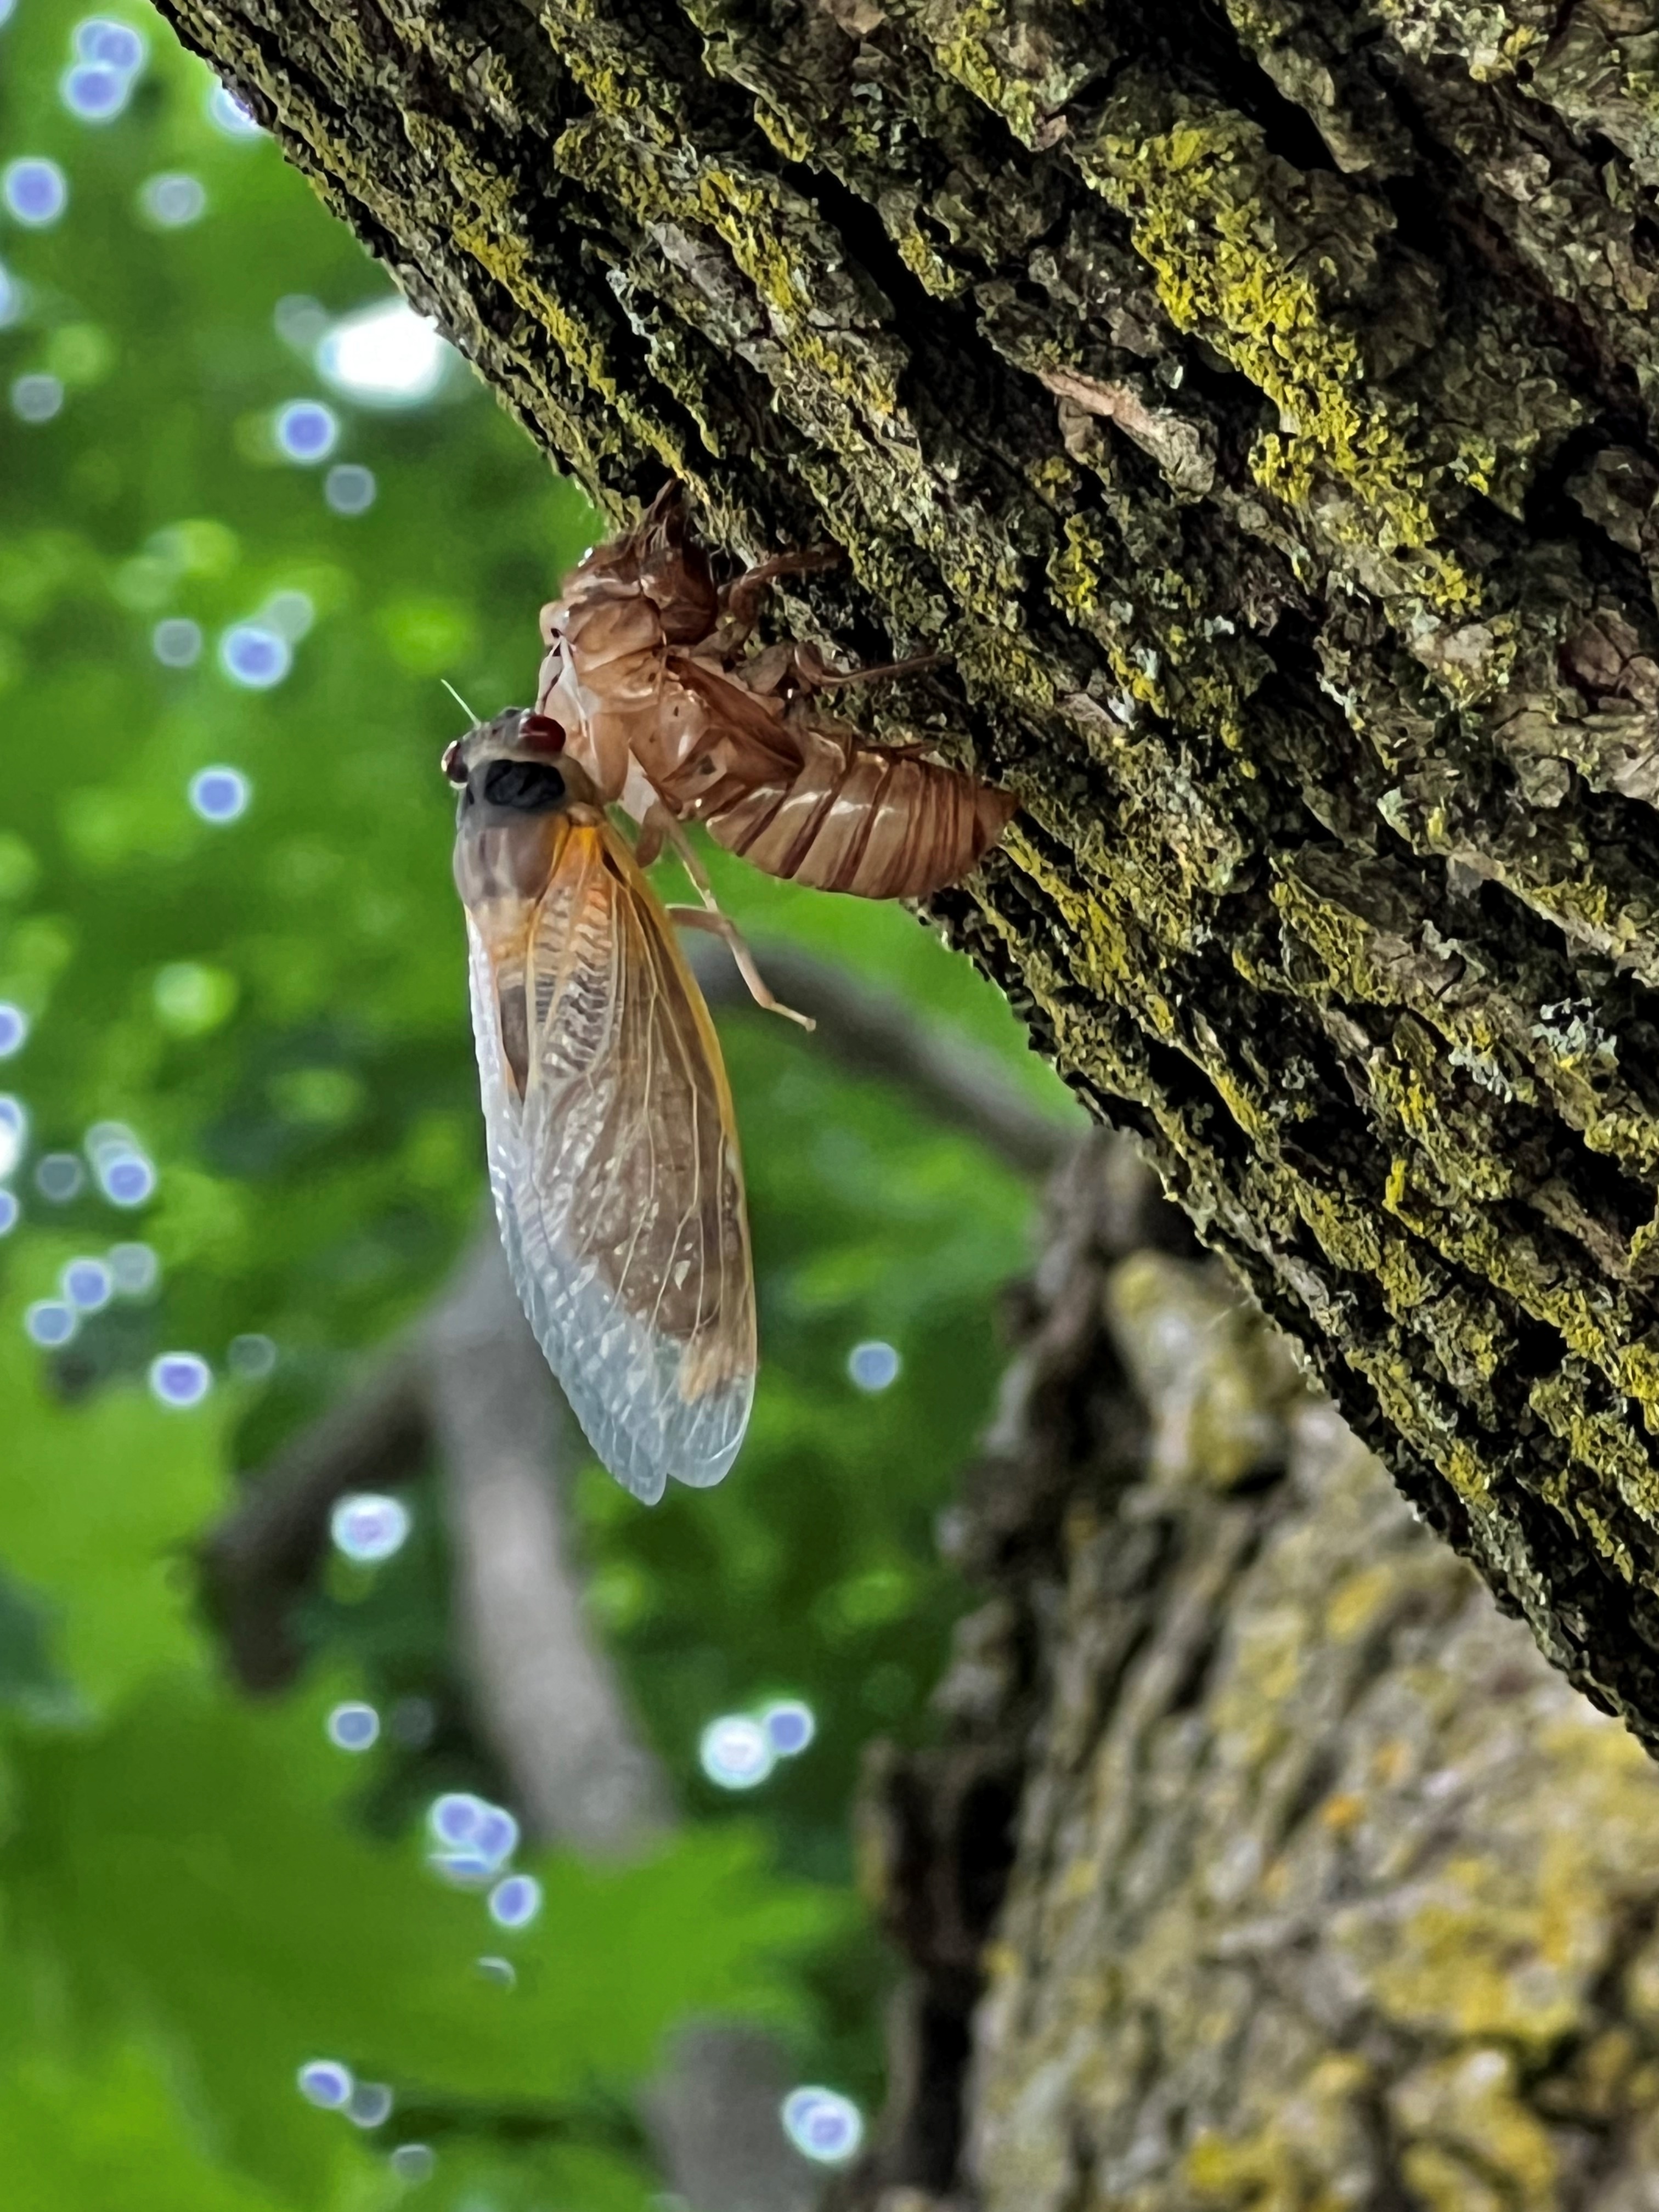 Not seeing any cicadas? See map of which suburbs have highest, lowest sightings